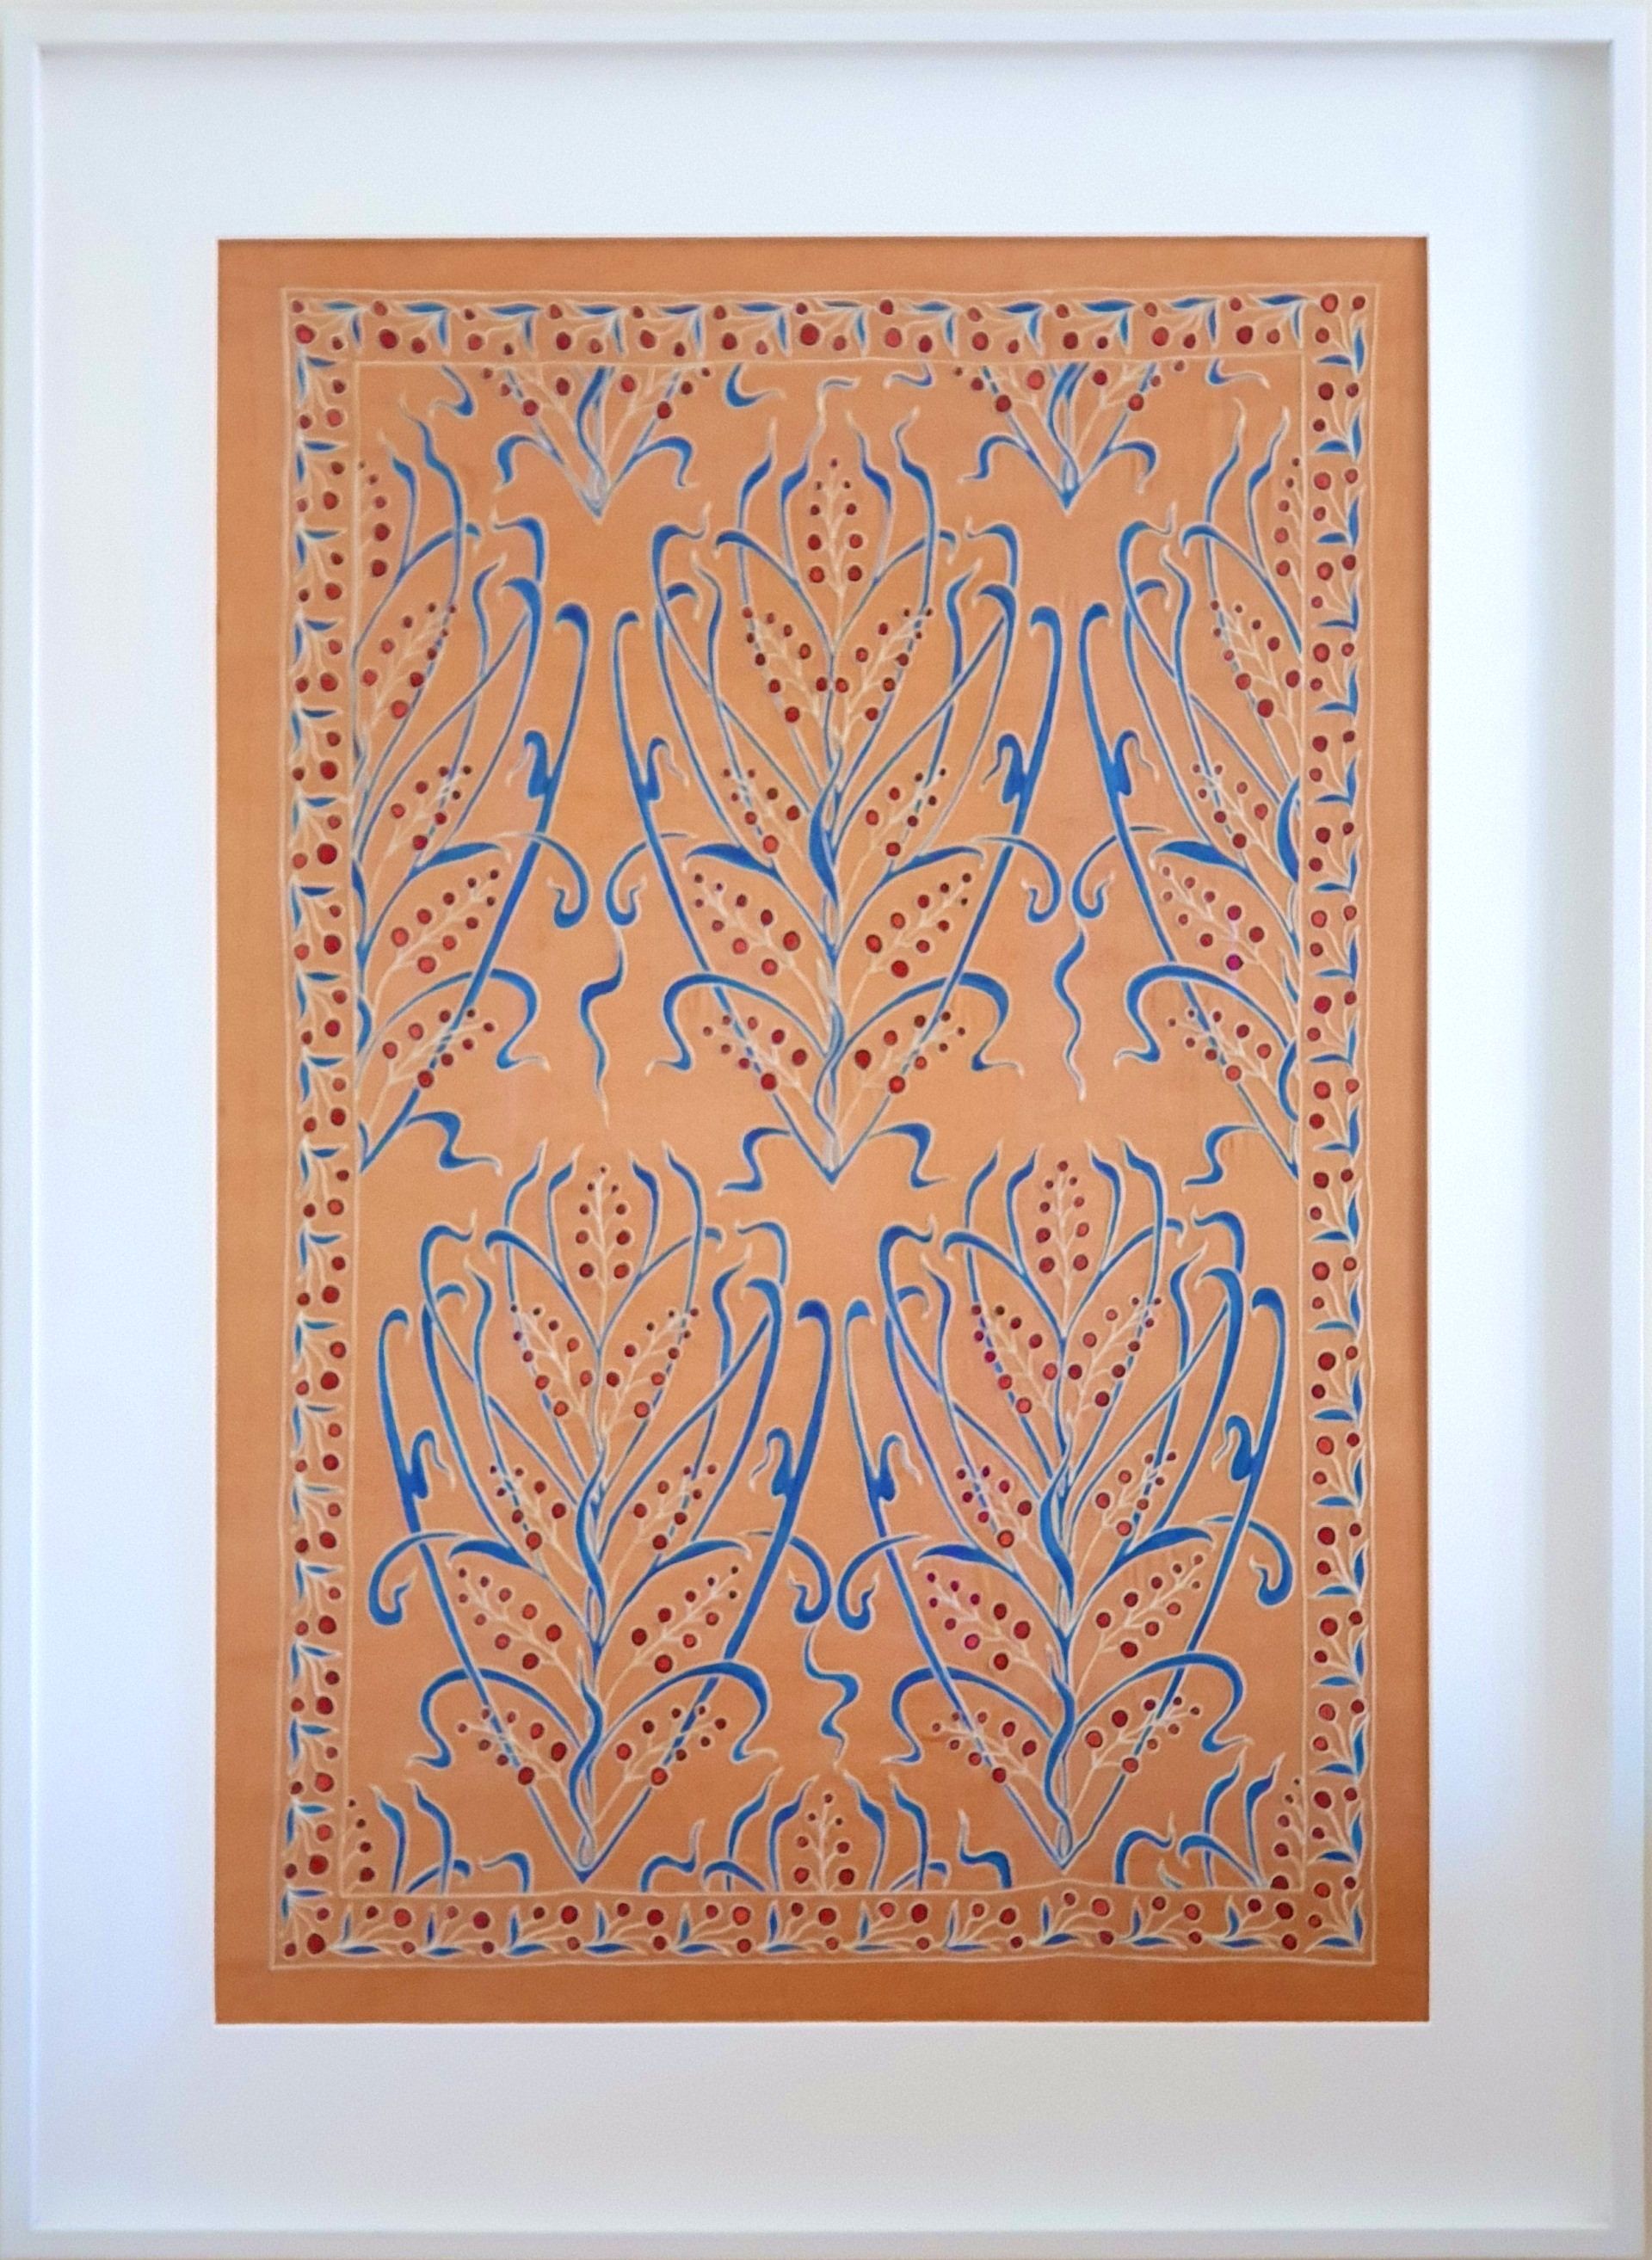 Suzani Art, Suzani Artwork, Suzani Embroidery, Grapevines Suzani, Vines, Suzani, Determination, Orange,  Orange Suzani, This silk vine and leaves Suzani was designed and hand embroidered on a naturally dyed silk fabric by an artist family in the region of Tashkent in Uzbekistan with the traditional technique of chain stitch, done with an instrument called a tambour, a hooked needle.     The silk threads are naturally dyed in a gradient of colours. Such dyeing method is seldom and unique. When embroidering a Suzani with such threads, the effect of a smooth colour transition is created.    Grapevines are a symbol of determination, endurance, survival and progress.